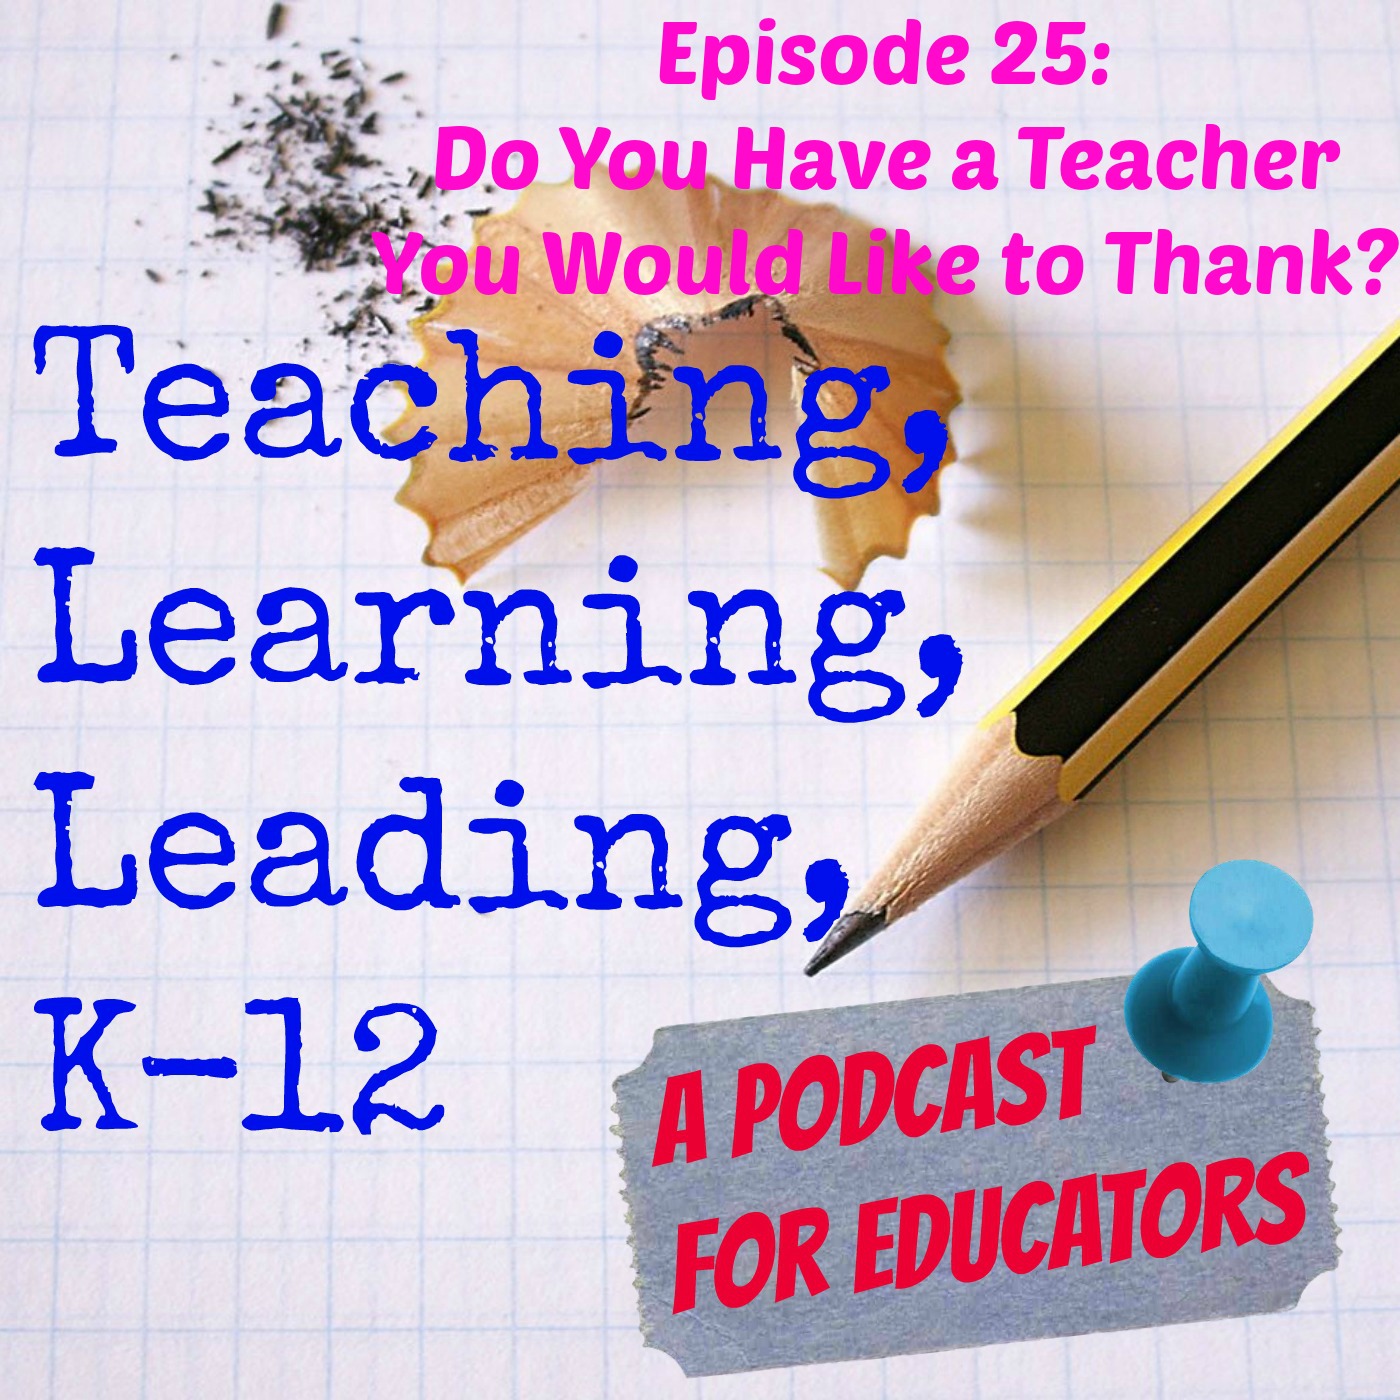 Episode 25: Do You Have a Teacher You Would Like to Thank?